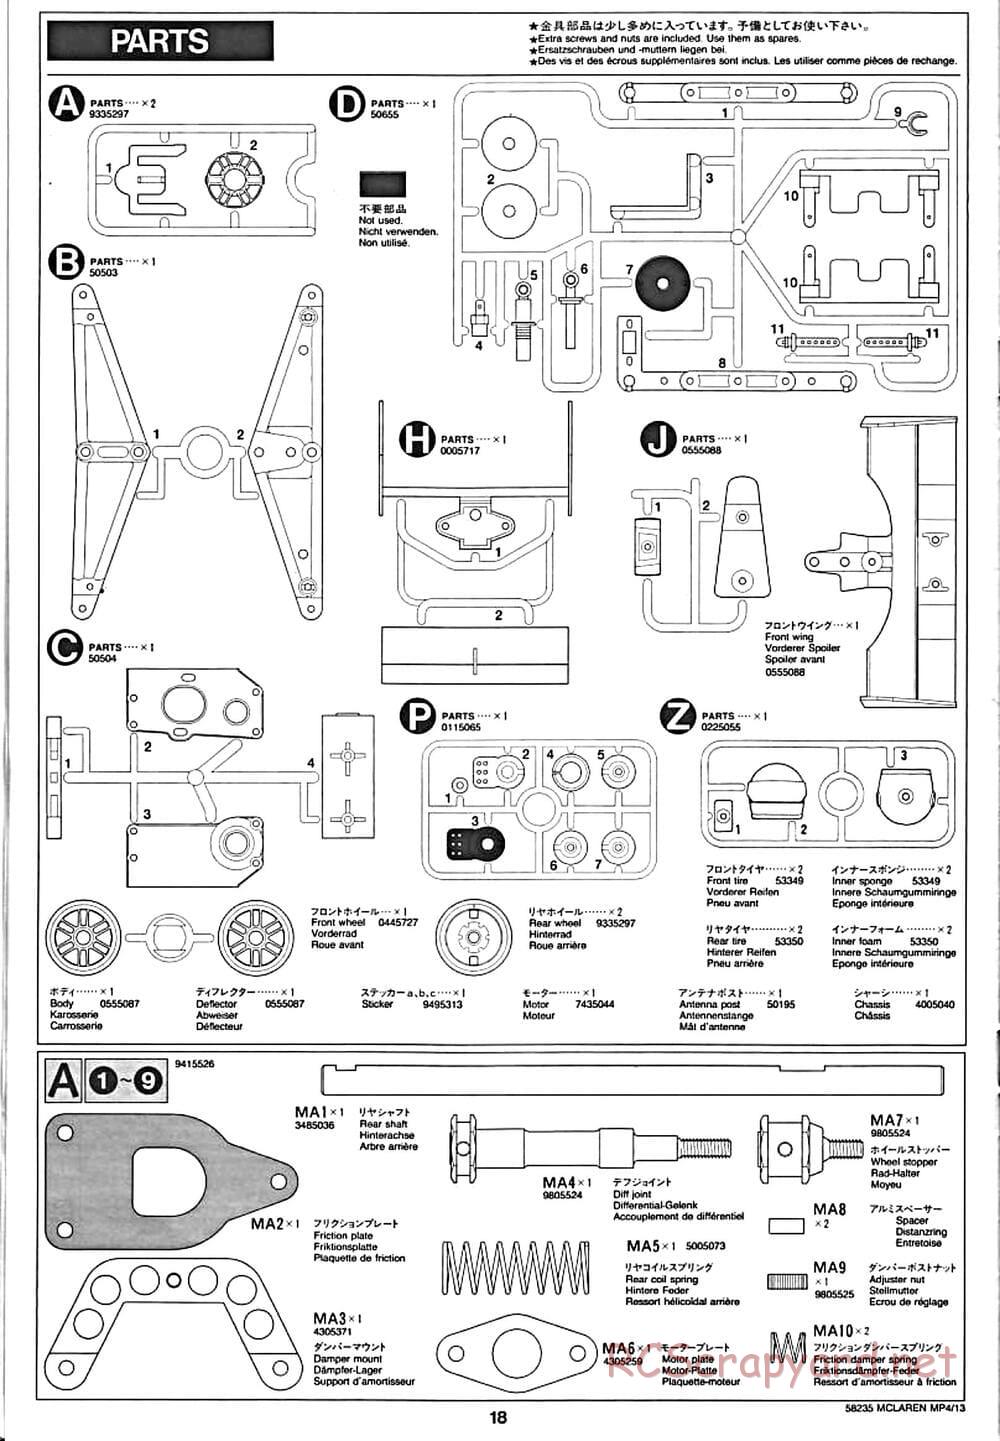 Tamiya - McLaren Mercedes MP4/13 - F103RS Chassis - Manual - Page 18